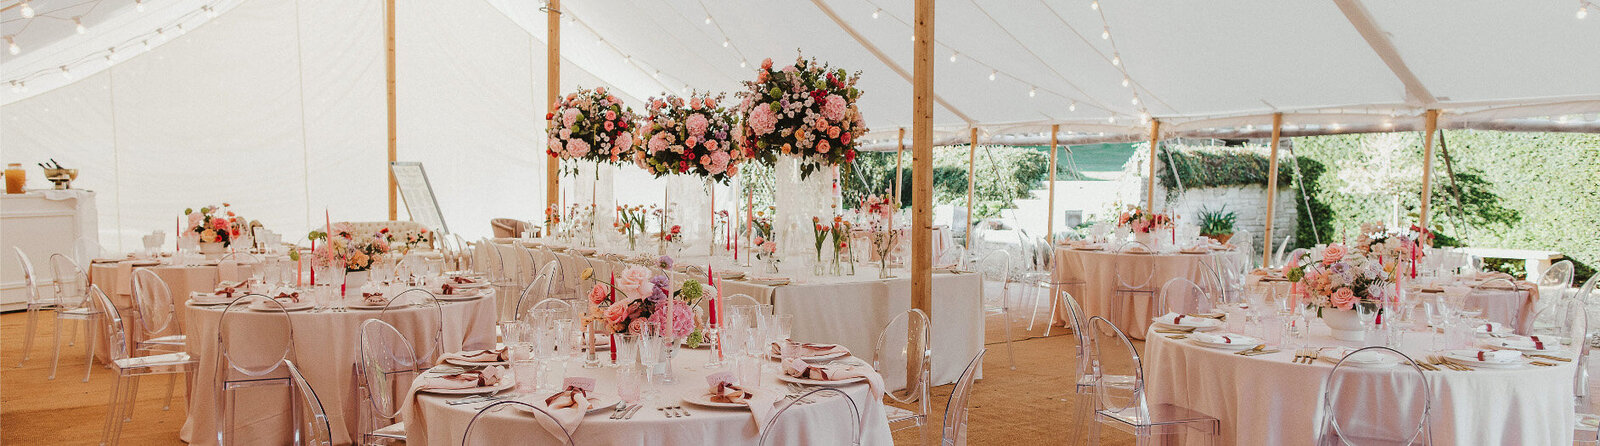 Interior of Tented Wedding Reception at Came house